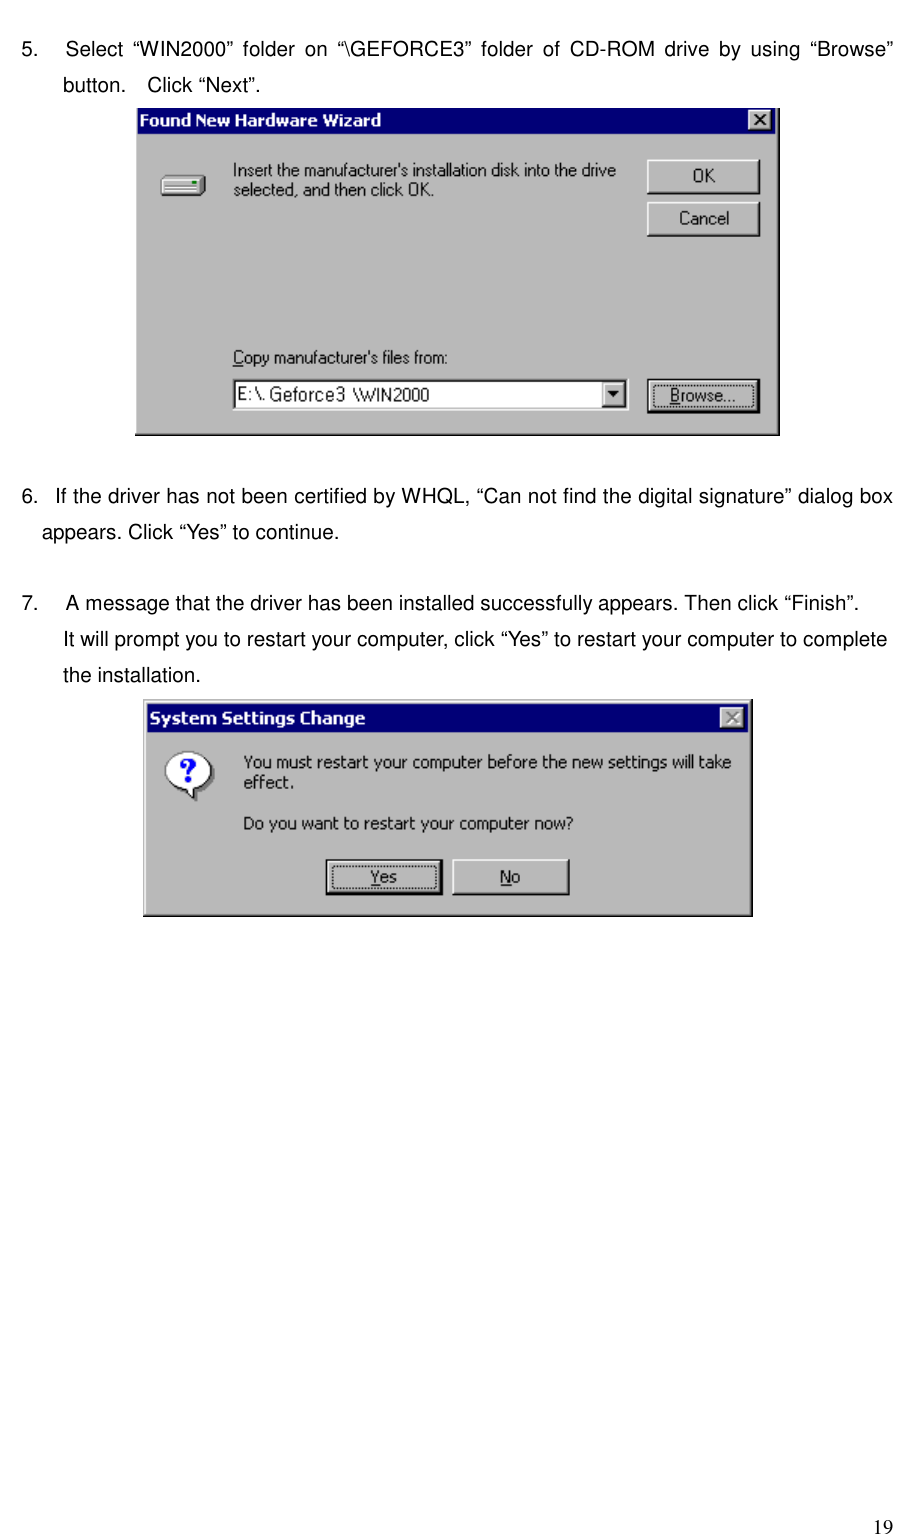     19 5.   Select “WIN2000” folder on “\GEFORCE3” folder of CD-ROM drive by using “Browse” button.  Click “Next”.   6.   If the driver has not been certified by WHQL, “Can not find the digital signature” dialog box appears. Click “Yes” to continue.  7.     A message that the driver has been installed successfully appears. Then click “Finish”. It will prompt you to restart your computer, click “Yes” to restart your computer to complete   the installation.  